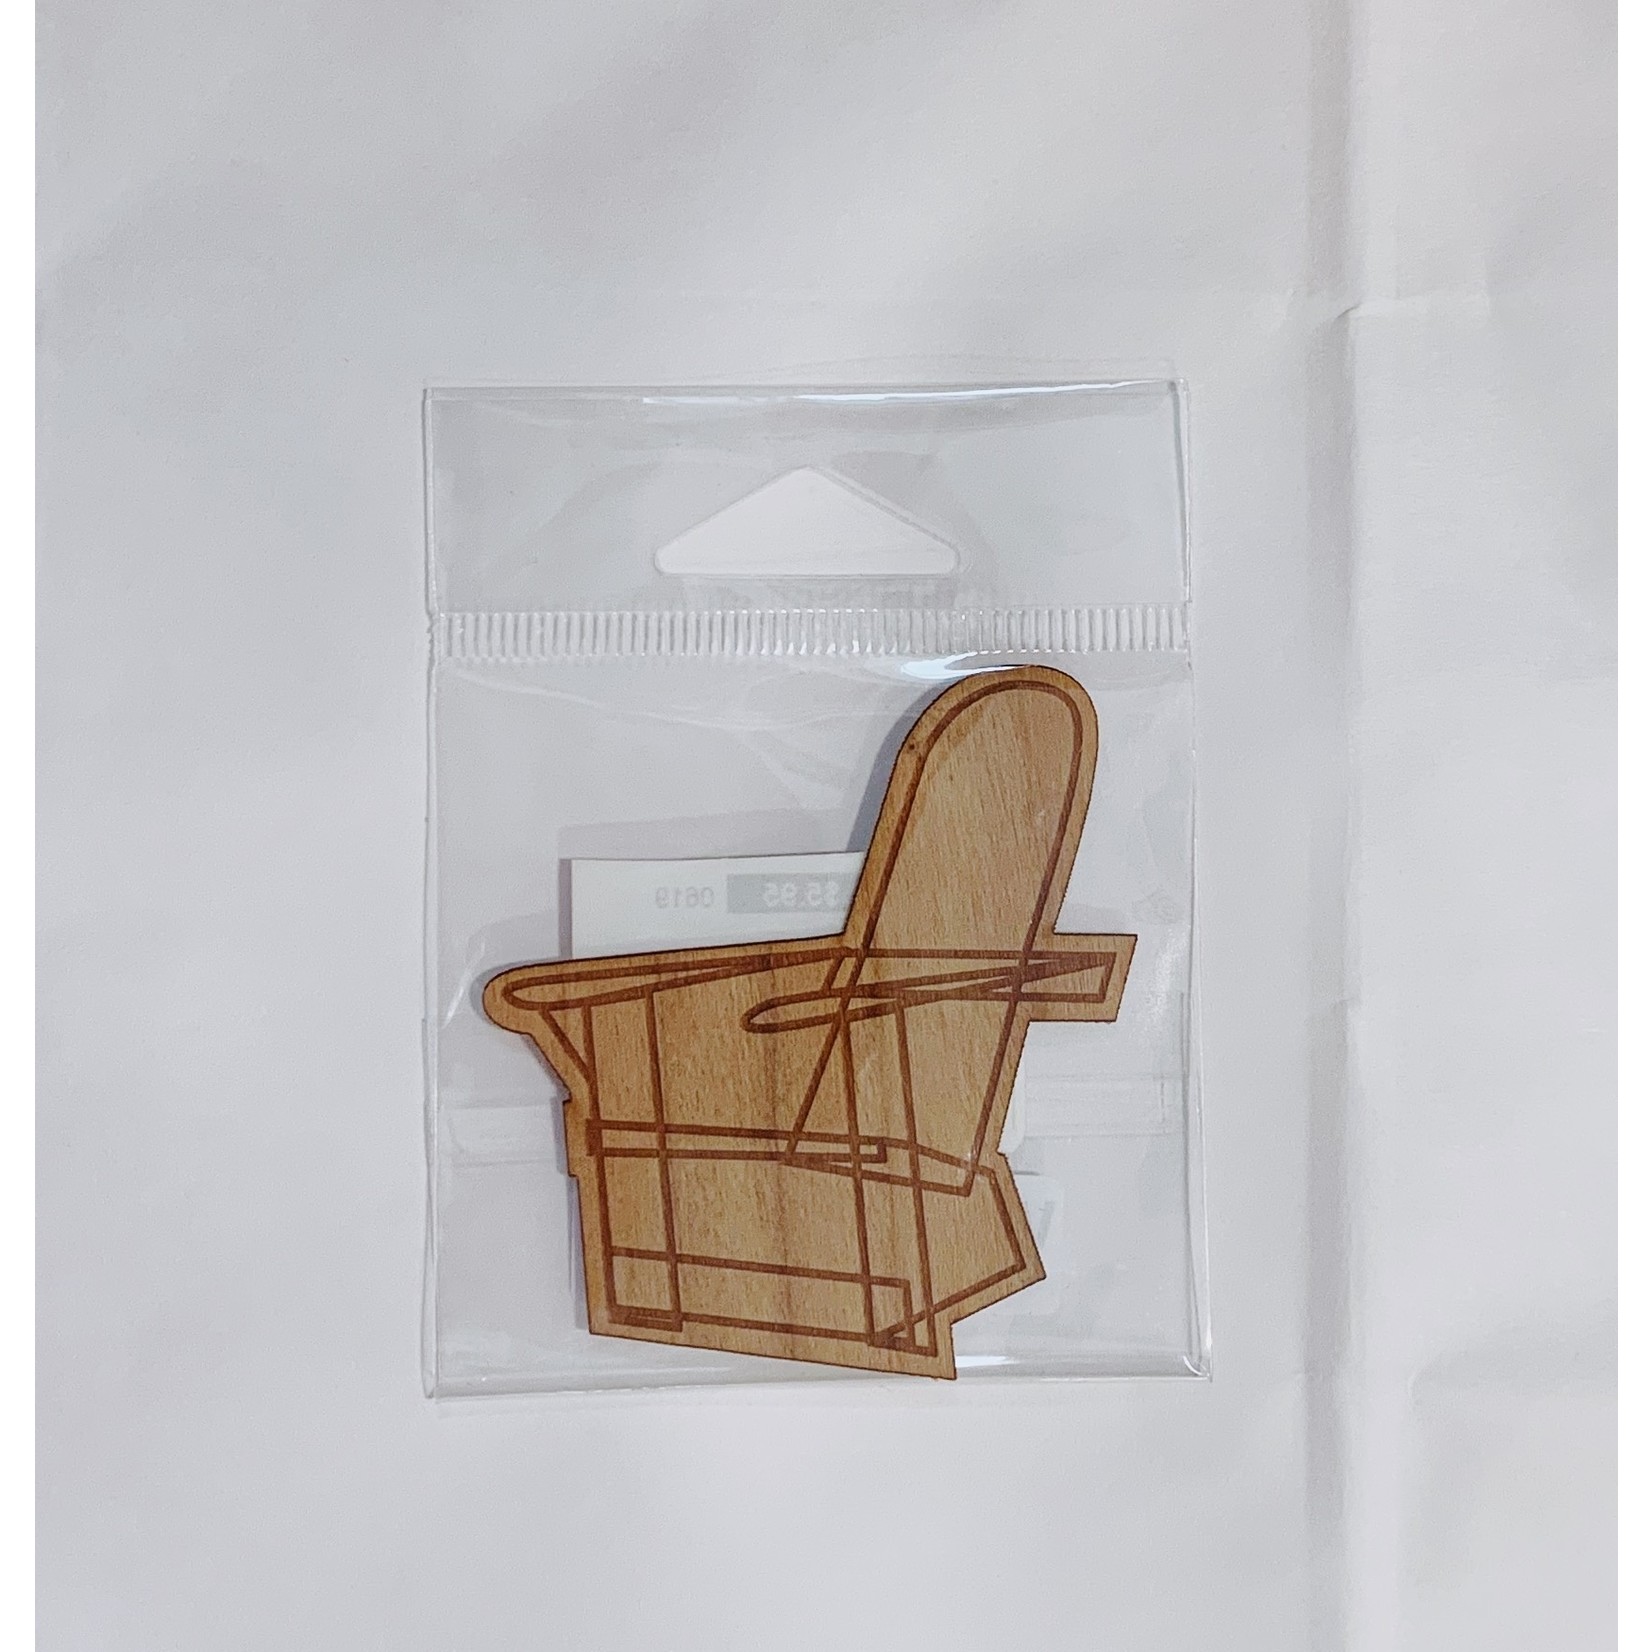 WOOD CHAIR DECAL